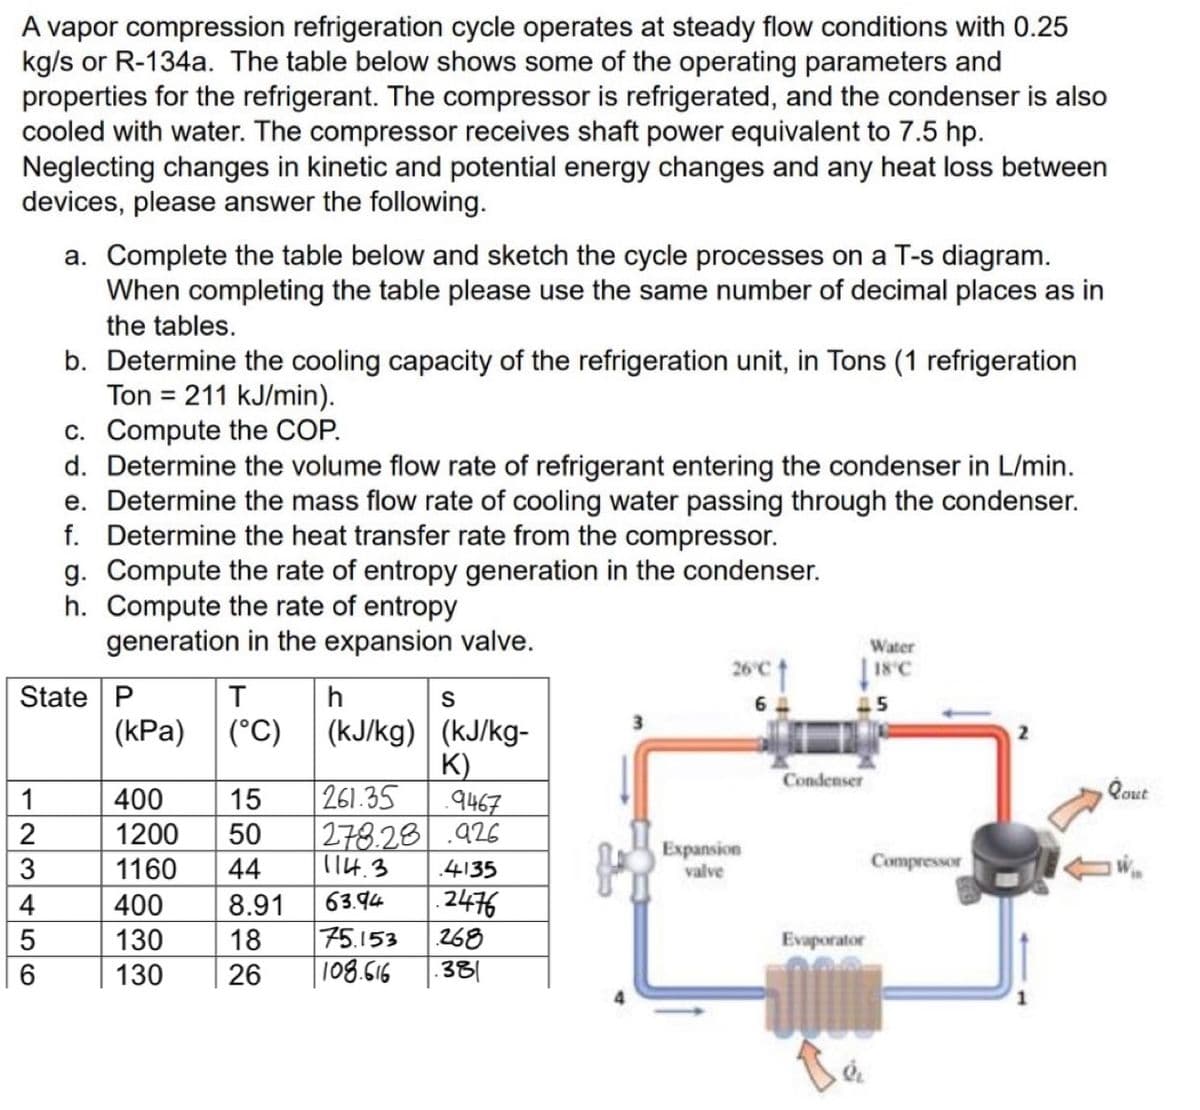 A vapor compression refrigeration cycle operates at steady flow conditions with 0.25
kg/s or R-134a. The table below shows some of the operating parameters and
properties for the refrigerant. The compressor is refrigerated, and the condenser is also
cooled with water. The compressor receives shaft power equivalent to 7.5 hp.
Neglecting changes in kinetic and potential energy changes and any heat loss between
devices, please answer the following.
a. Complete the table below and sketch the cycle processes on a T-s diagram.
When completing the table please use the same number of decimal places as in
the tables.
123456
b. Determine the cooling capacity of the refrigeration unit, in Tons (1 refrigeration
Ton = 211 kJ/min).
c. Compute the COP.
d. Determine the volume flow rate of refrigerant entering the condenser in L/min.
e. Determine the mass flow rate of cooling water passing through the condenser.
f. Determine the heat transfer rate from the compressor.
g. Compute the rate of entropy generation in the condenser.
h. Compute the rate of entropy
generation in the expansion valve.
State P
T
(kPa) (°C)
400 15
1200 50
1160 44
400 8.91
130 18
130
h
S
(kJ/kg) (kJ/kg-
K)
261.35
.9467
278.28 926
114.3 .4135
63.94 2476
75.153 268
26 108.616 .381
26°C
Expansion
valve
Condenser
Evaporator
N
Water
18°C
Compressor
Qout
W